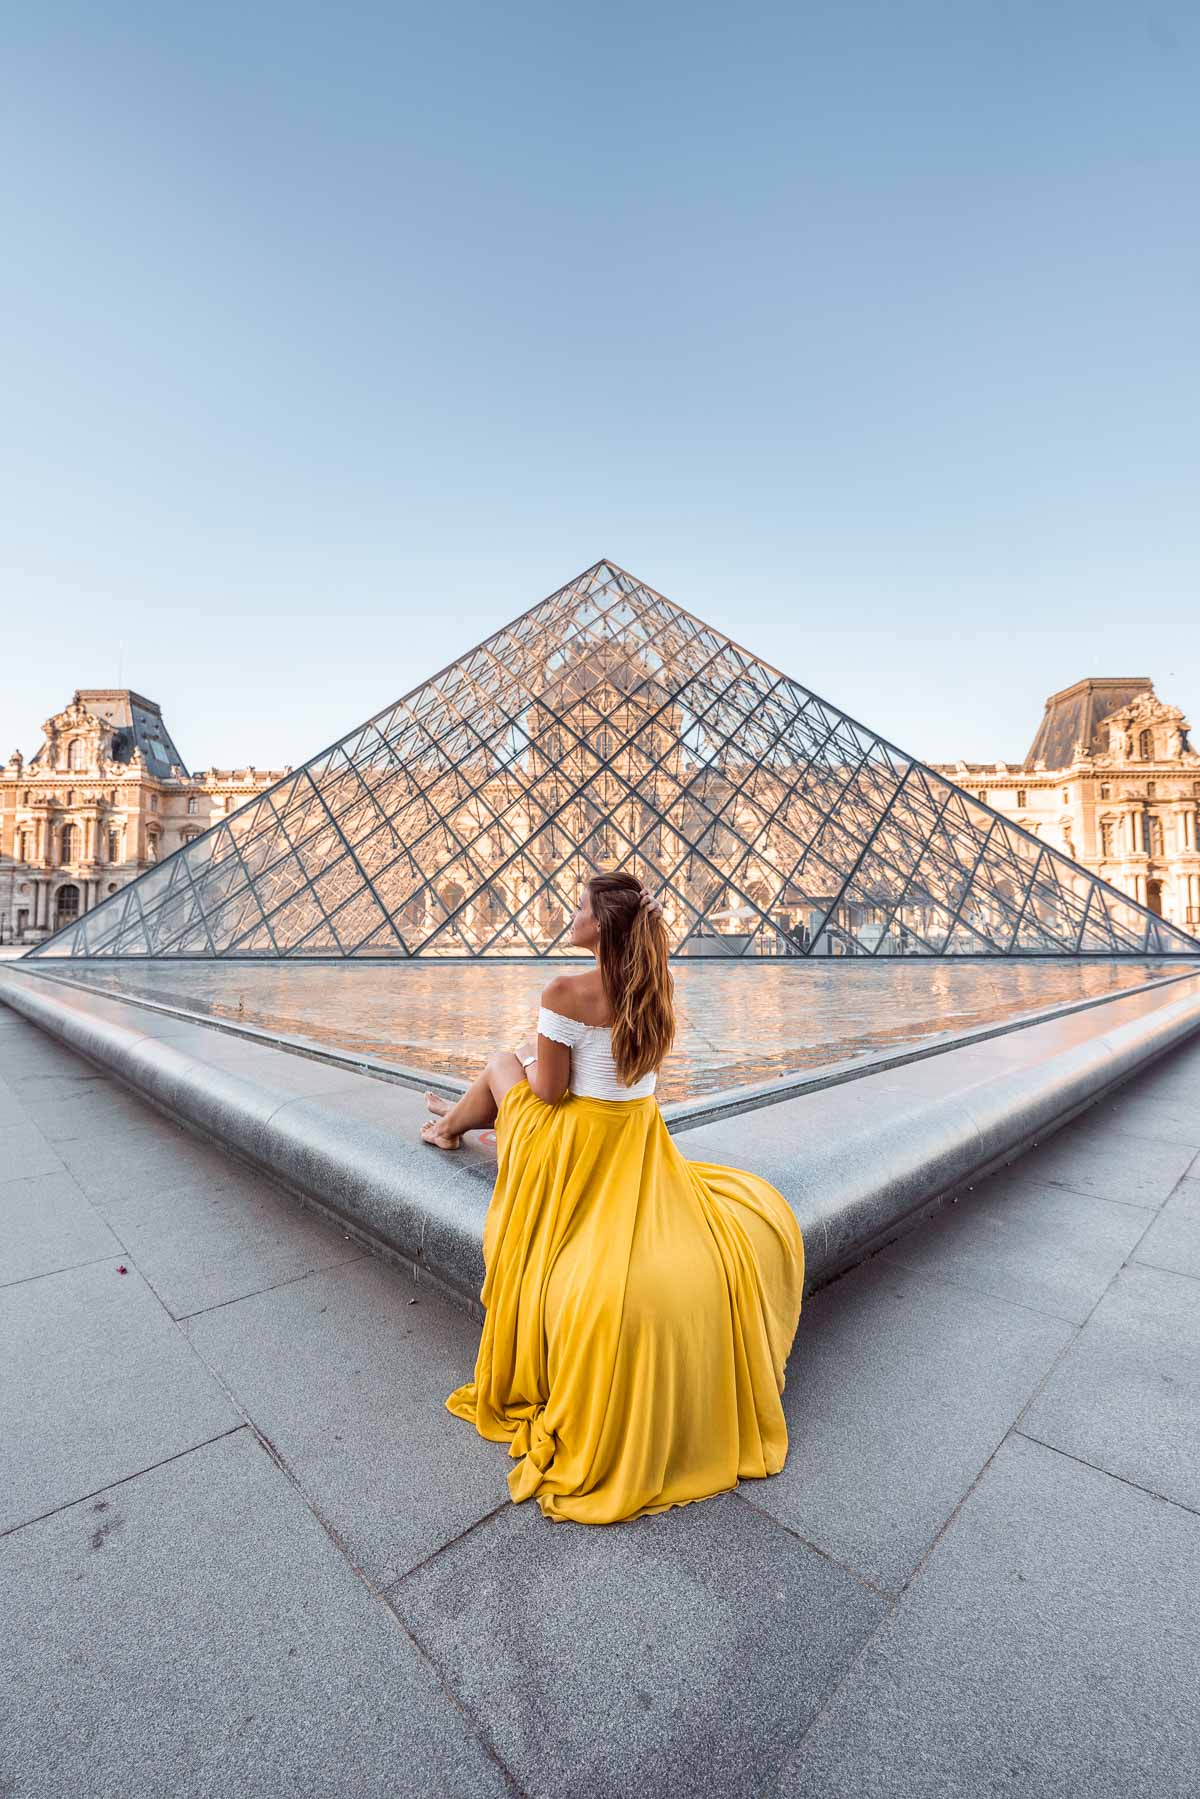 Girl in a yellow skirt sitting in front of one of the pyramids at the Louvre, one of the most instagrammable places in Paris